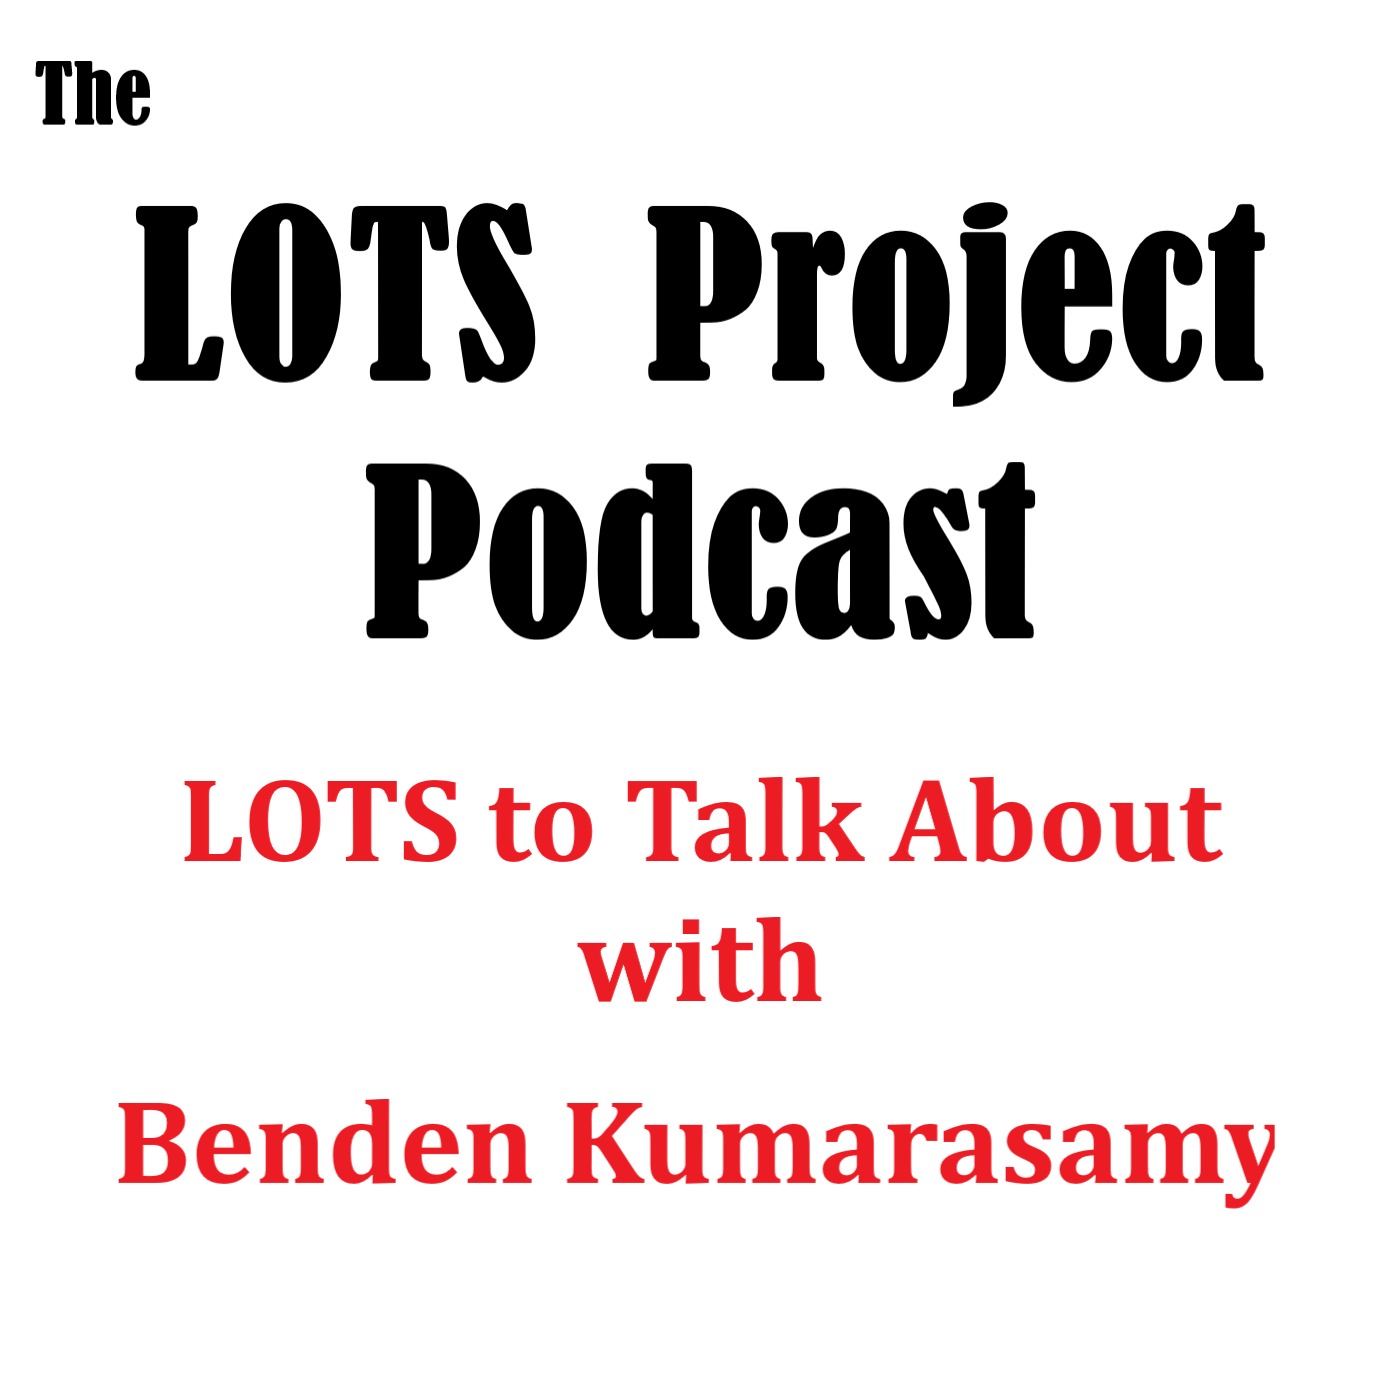 LOTS to Talk About with Benden Kumarasamy #interview #podcast #live #communication #publicspeaking #MasterTalk